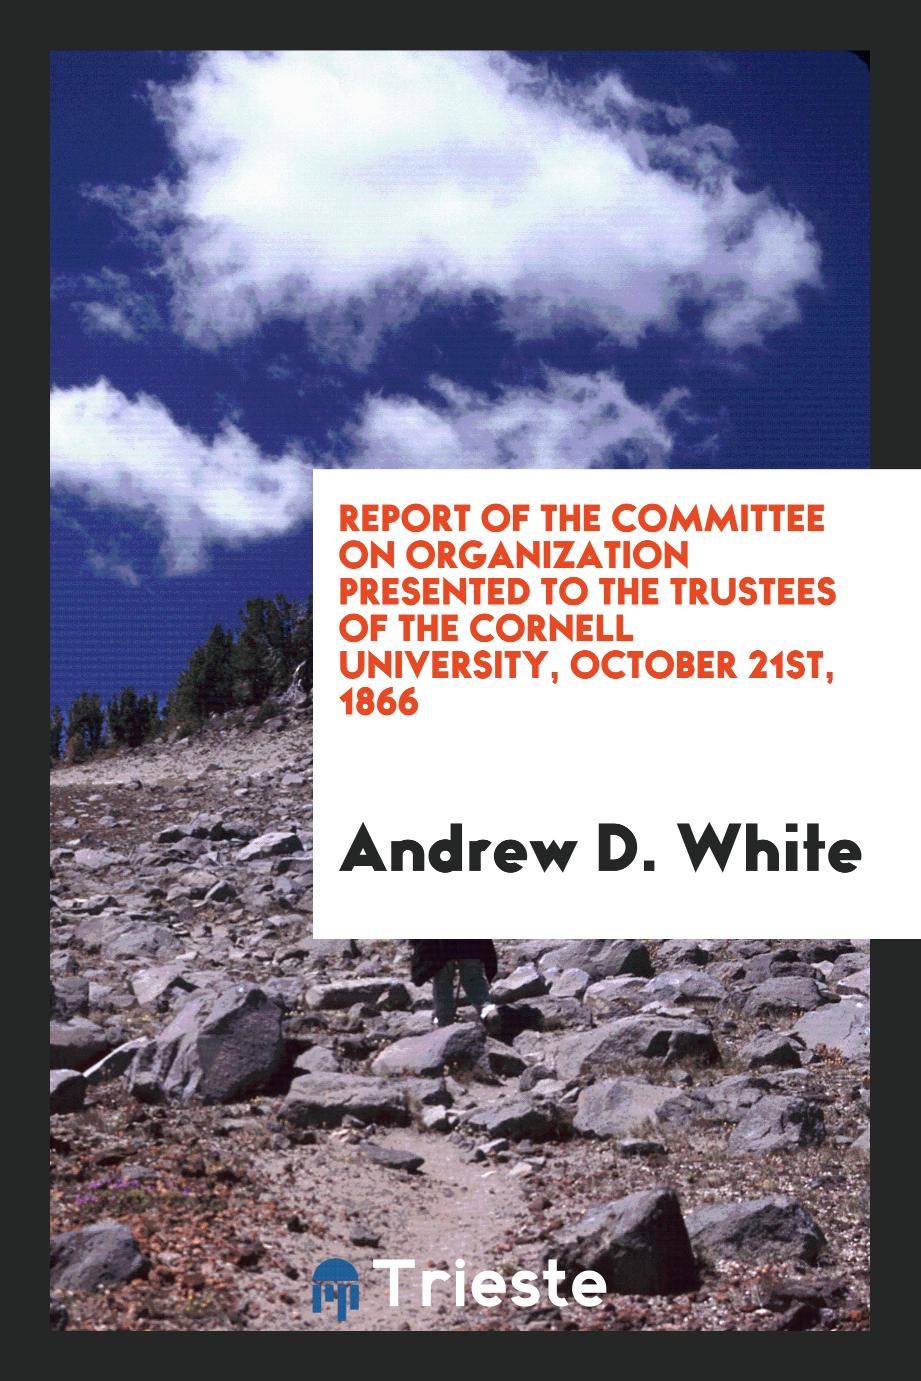 Report of the Committee on Organization presented to the trustees of the cornell university, October 21st, 1866